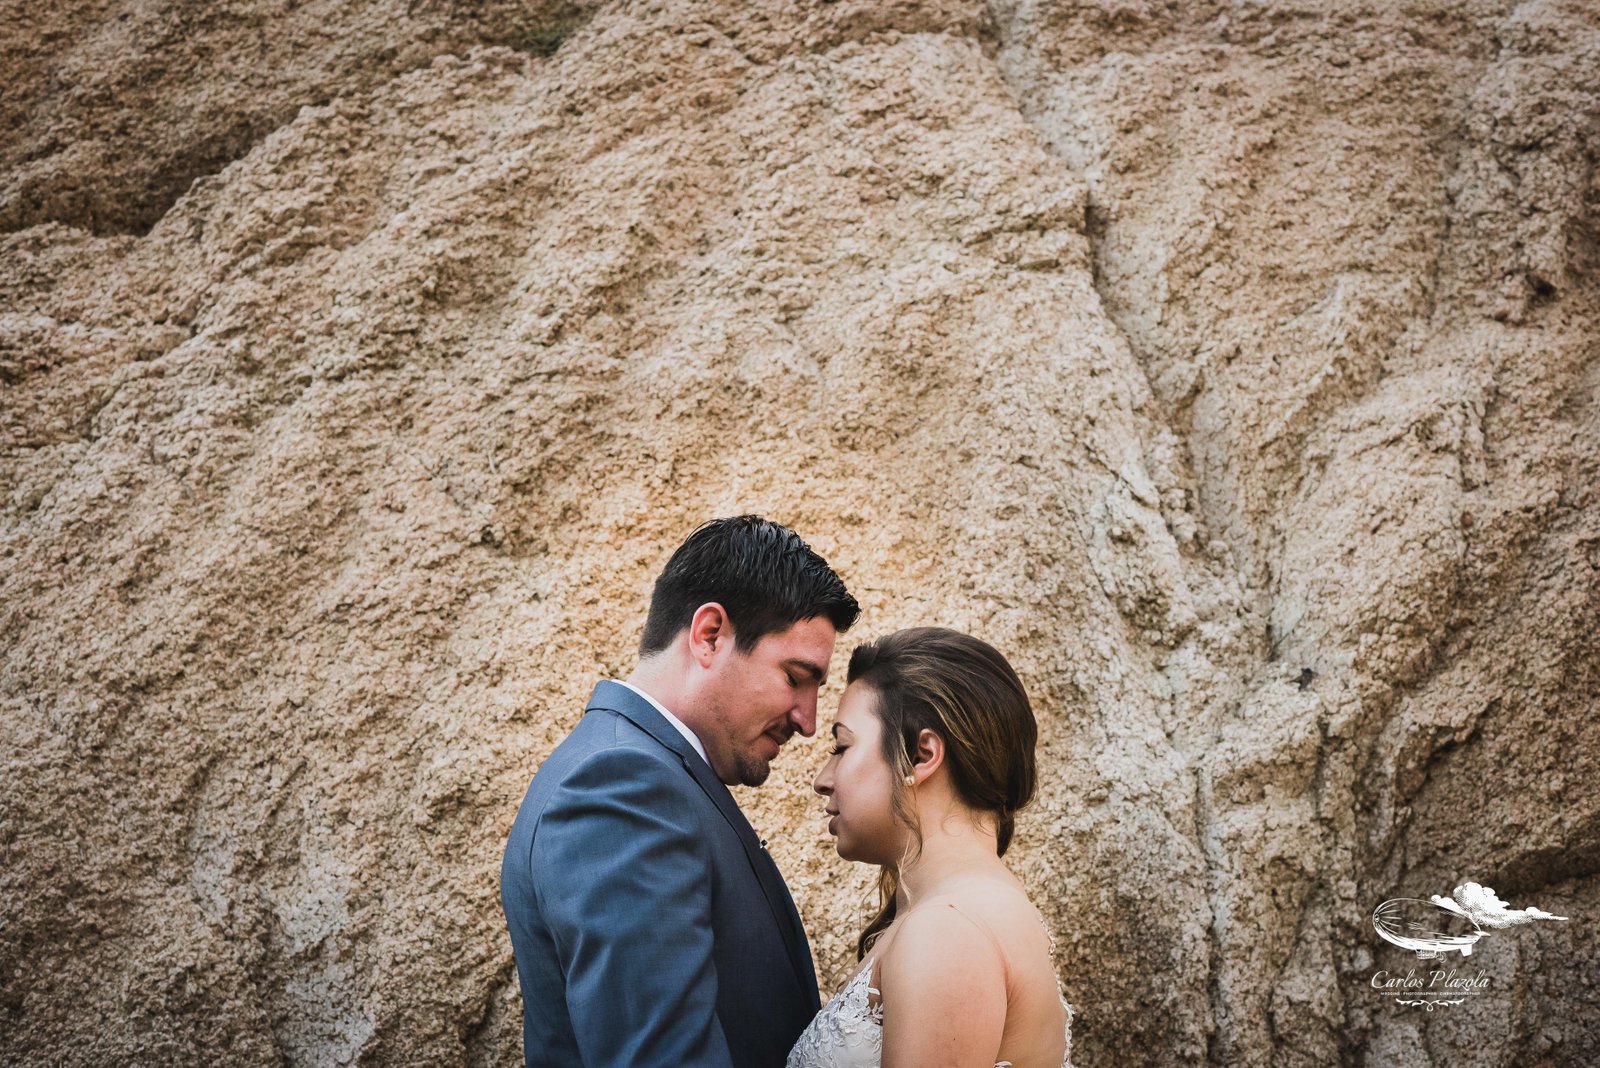 Bride and groom kissing each other and hanging out prior to the ceremony, just getting some together time. They were such a sweet couple and the ceremony took place at Wedding Venue Grand Fiesta Americana Los Cabos. Wedding planning and design by Cabo Wedding Services